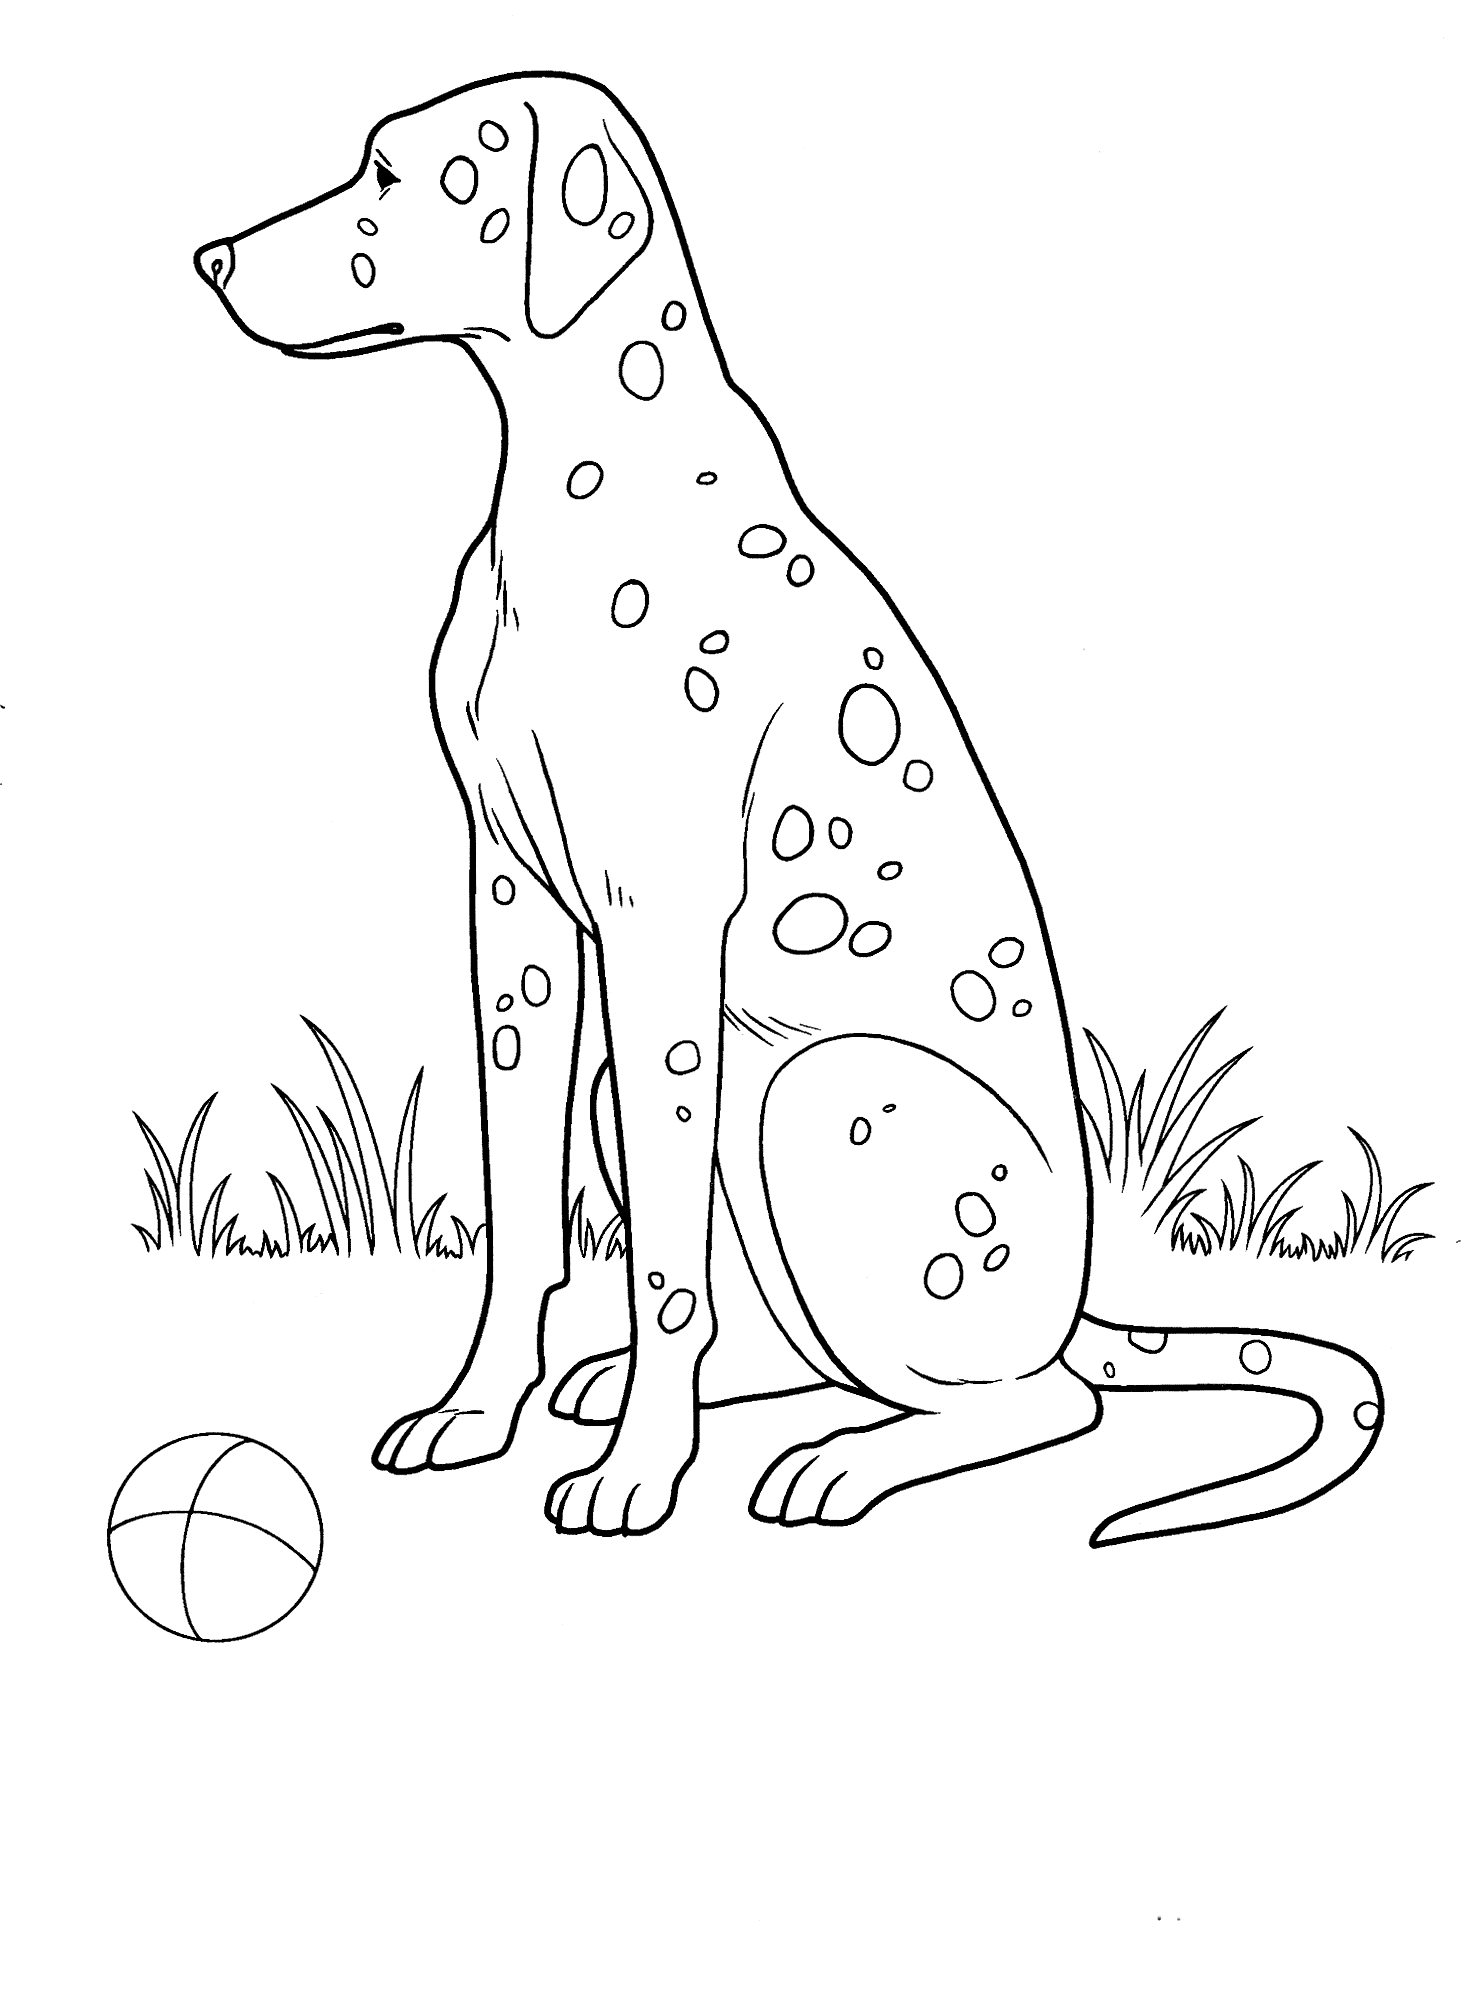 Coloring page - Spotted dog